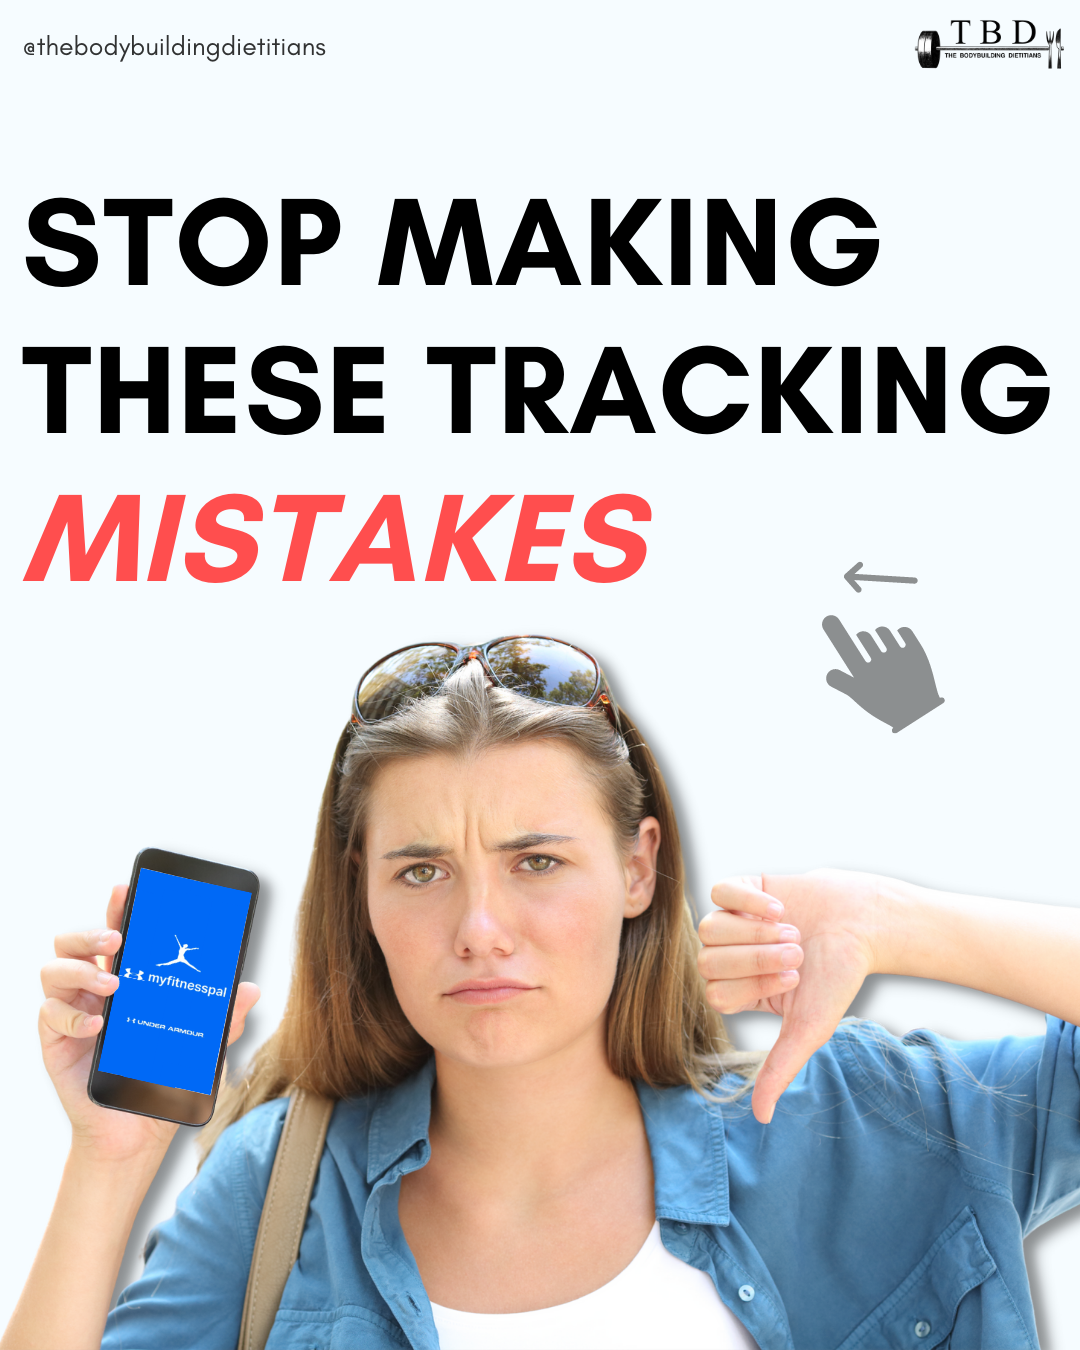 MyFitnessPal: 8 Mistakes You're Making On MyFitnessPal That Are